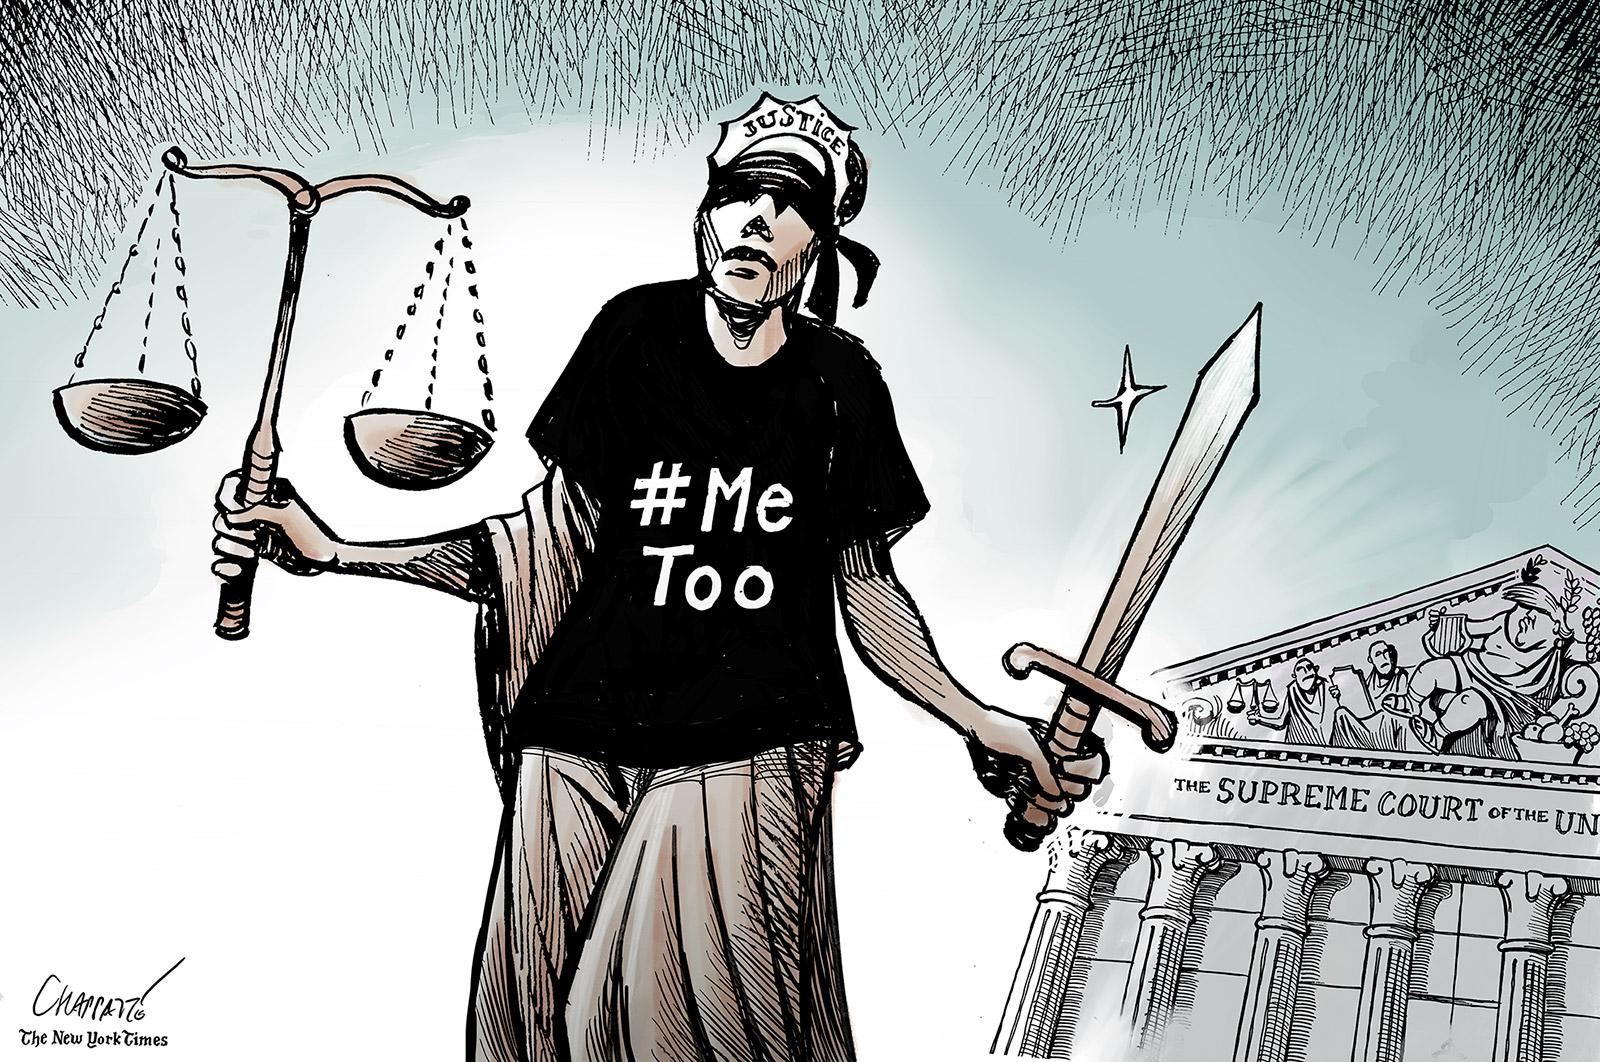 The Supreme Court in the #MeToo era